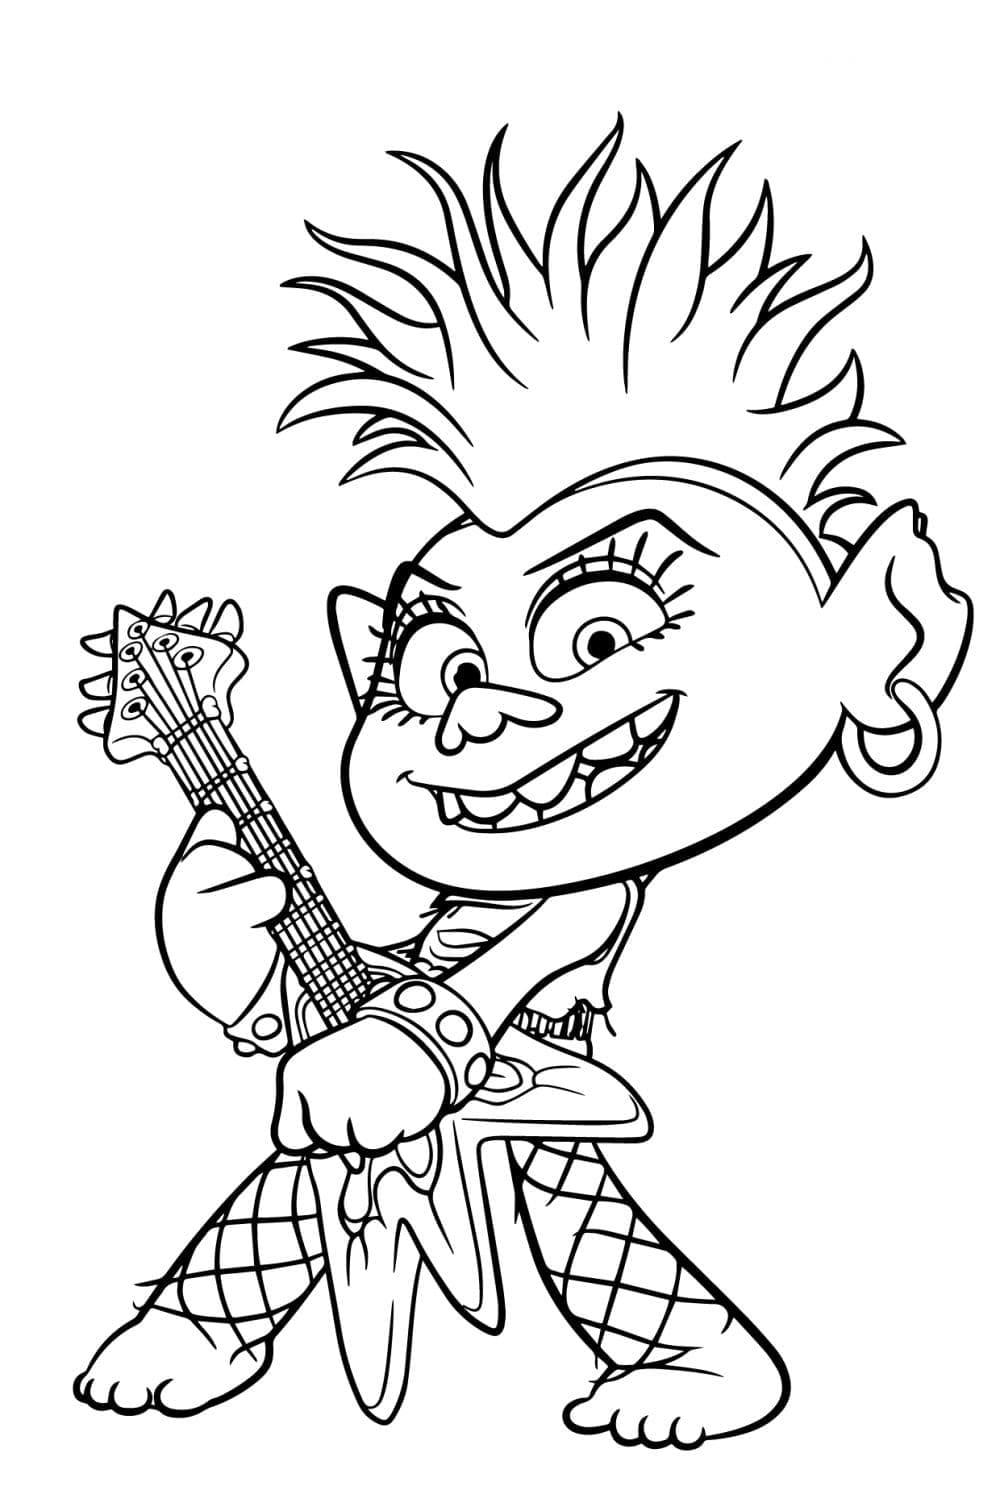 Queen Barb from Trolls coloring page - Download, Print or Color Online ...